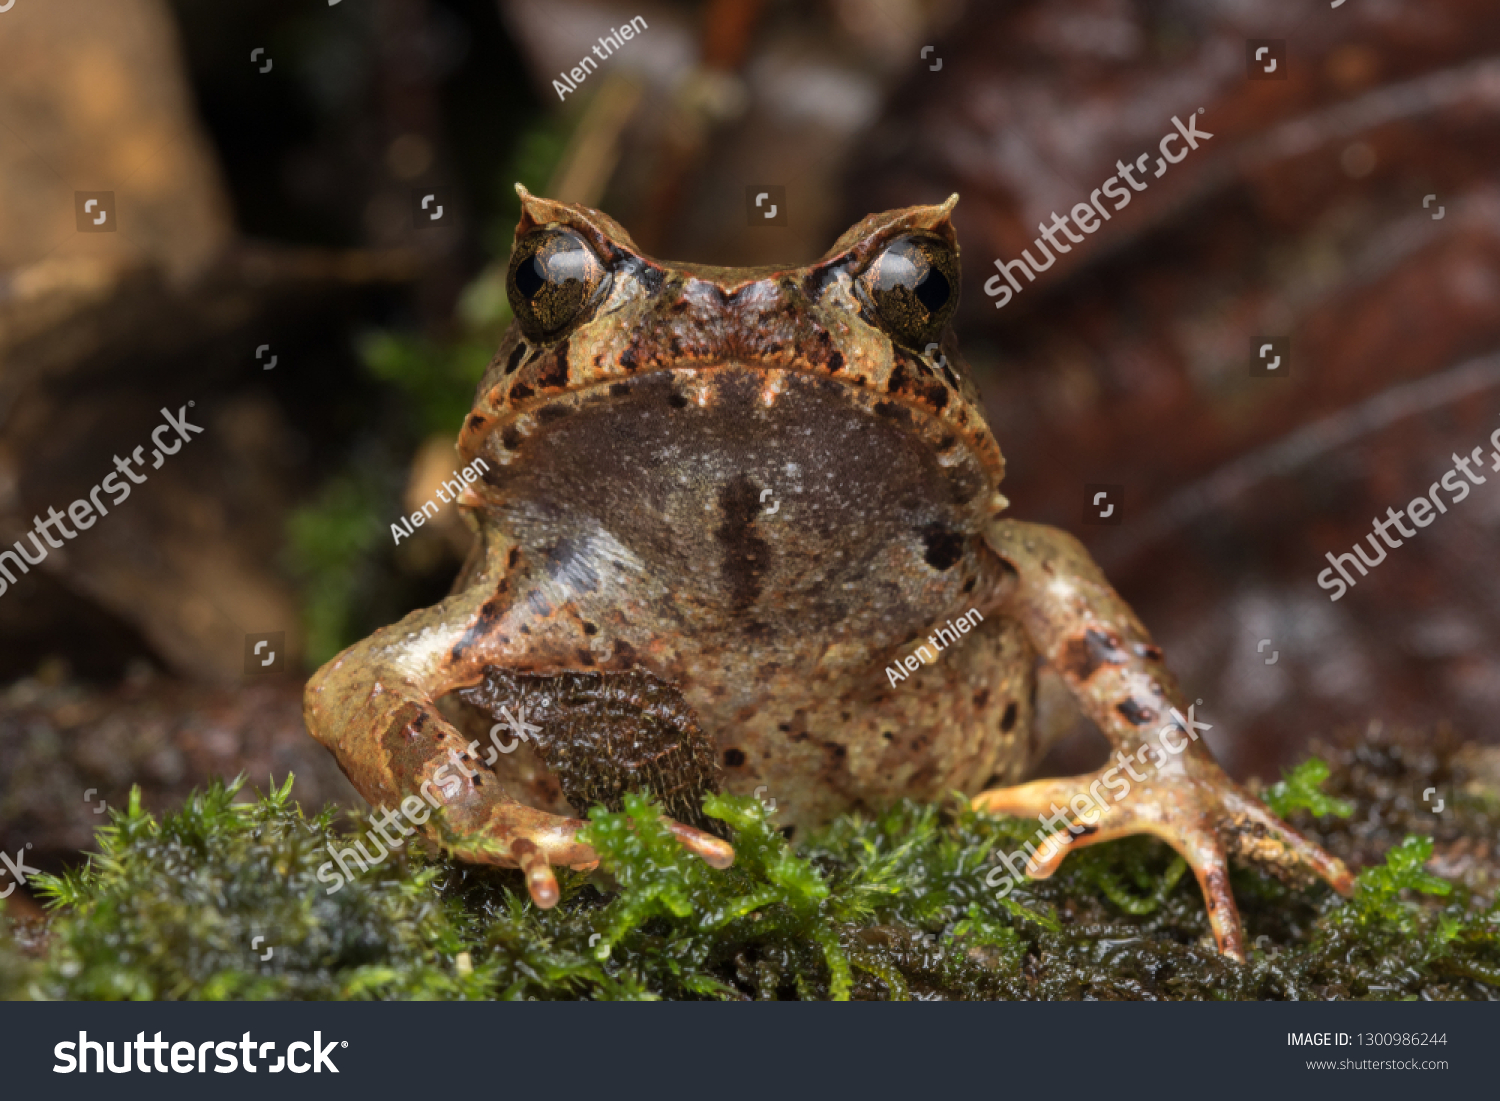 Beautiful Borneo Horn frog, Borneo Horn frog, Close-up of Borneo Horn Frog #1300986244